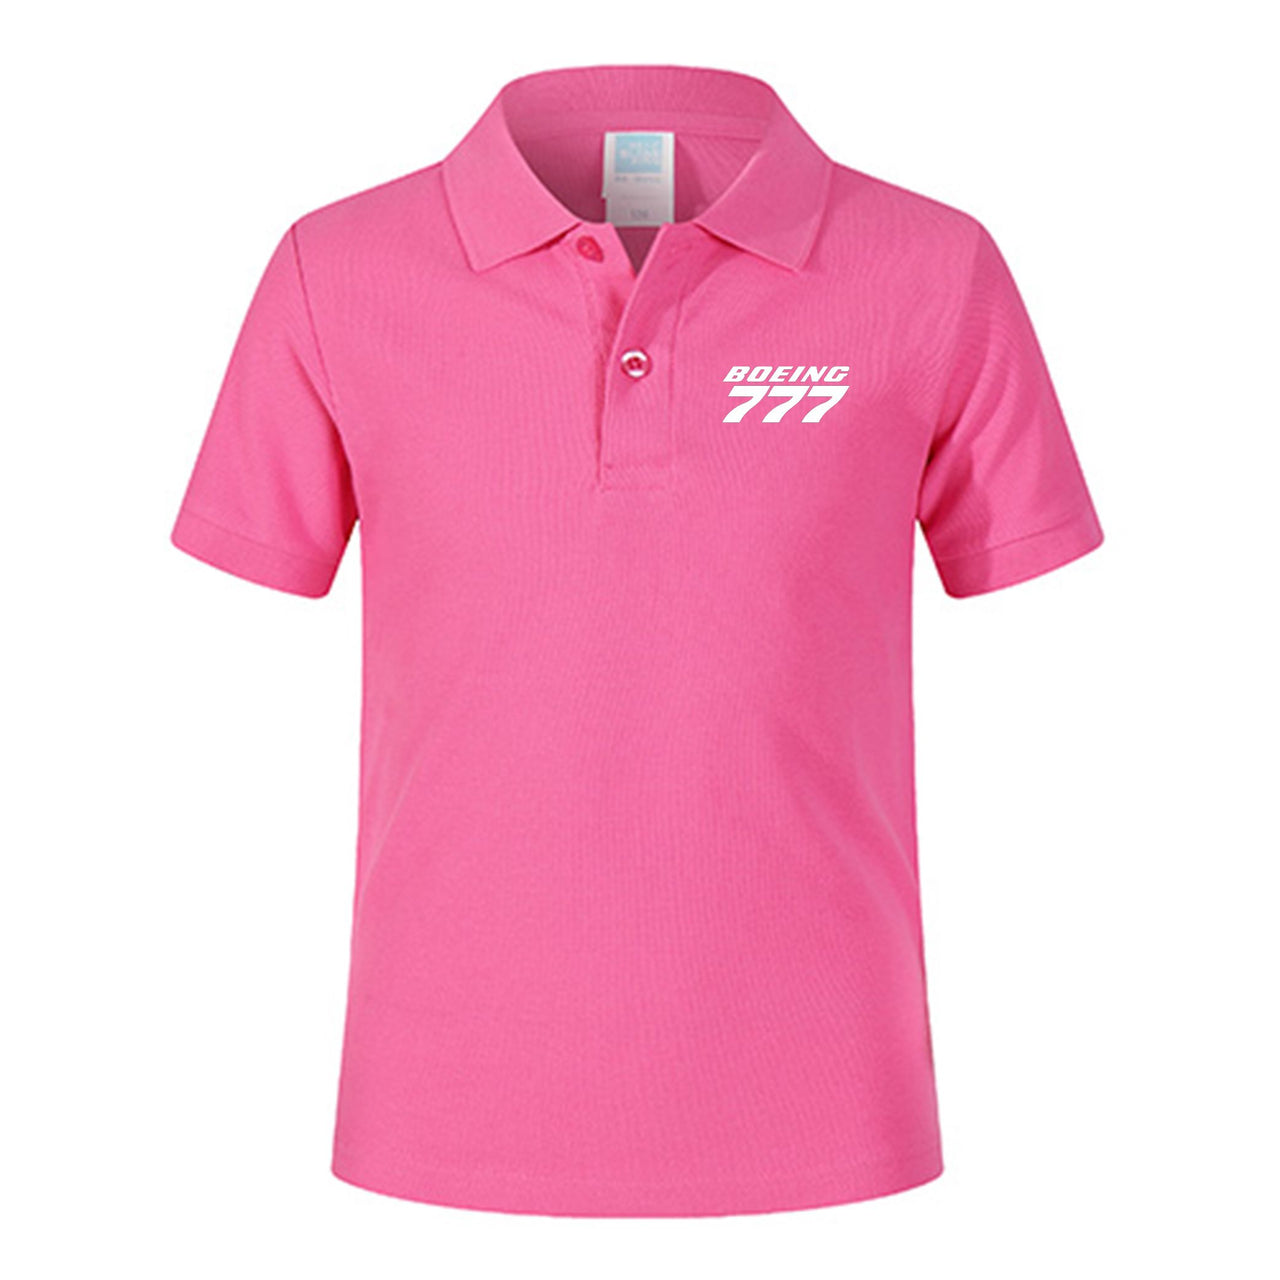 Boeing 777 & Text Designed Children Polo T-Shirts